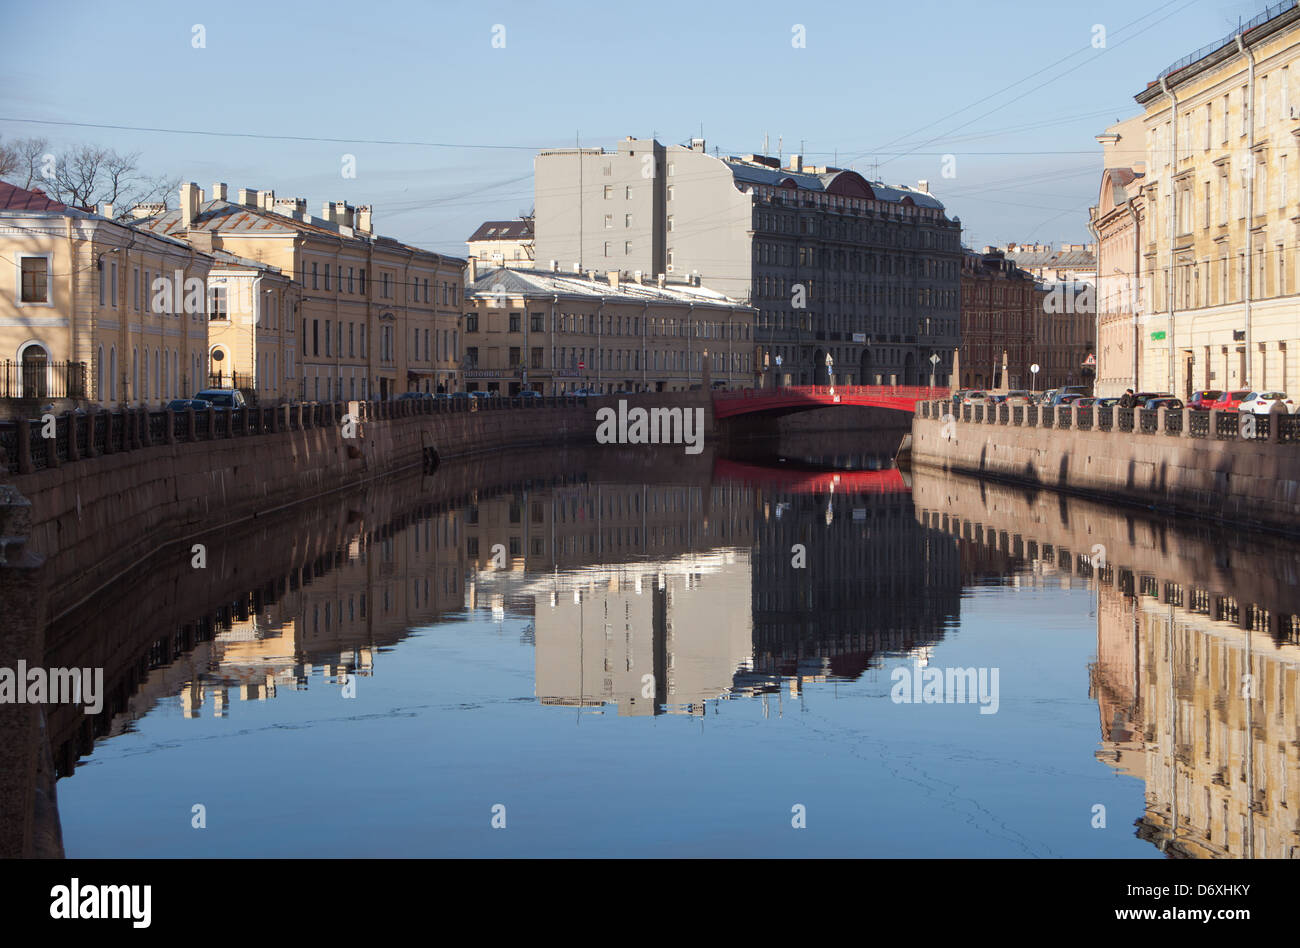 The Red Bridge across the Moika River in Saint Petersburg, Russia. Stock Photo